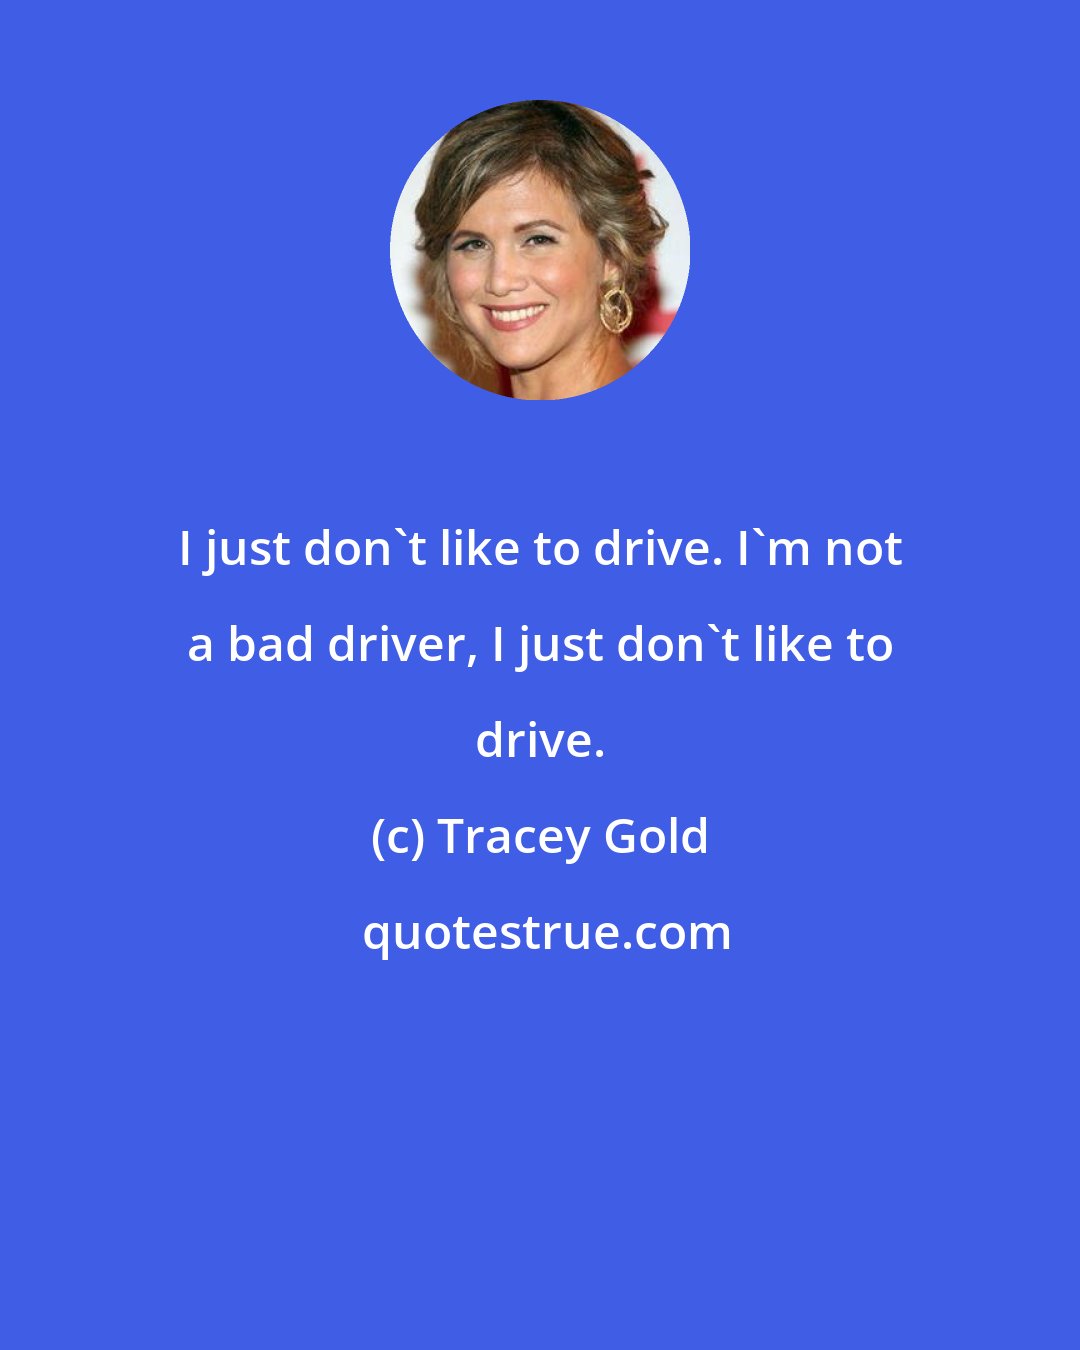 Tracey Gold: I just don't like to drive. I'm not a bad driver, I just don't like to drive.